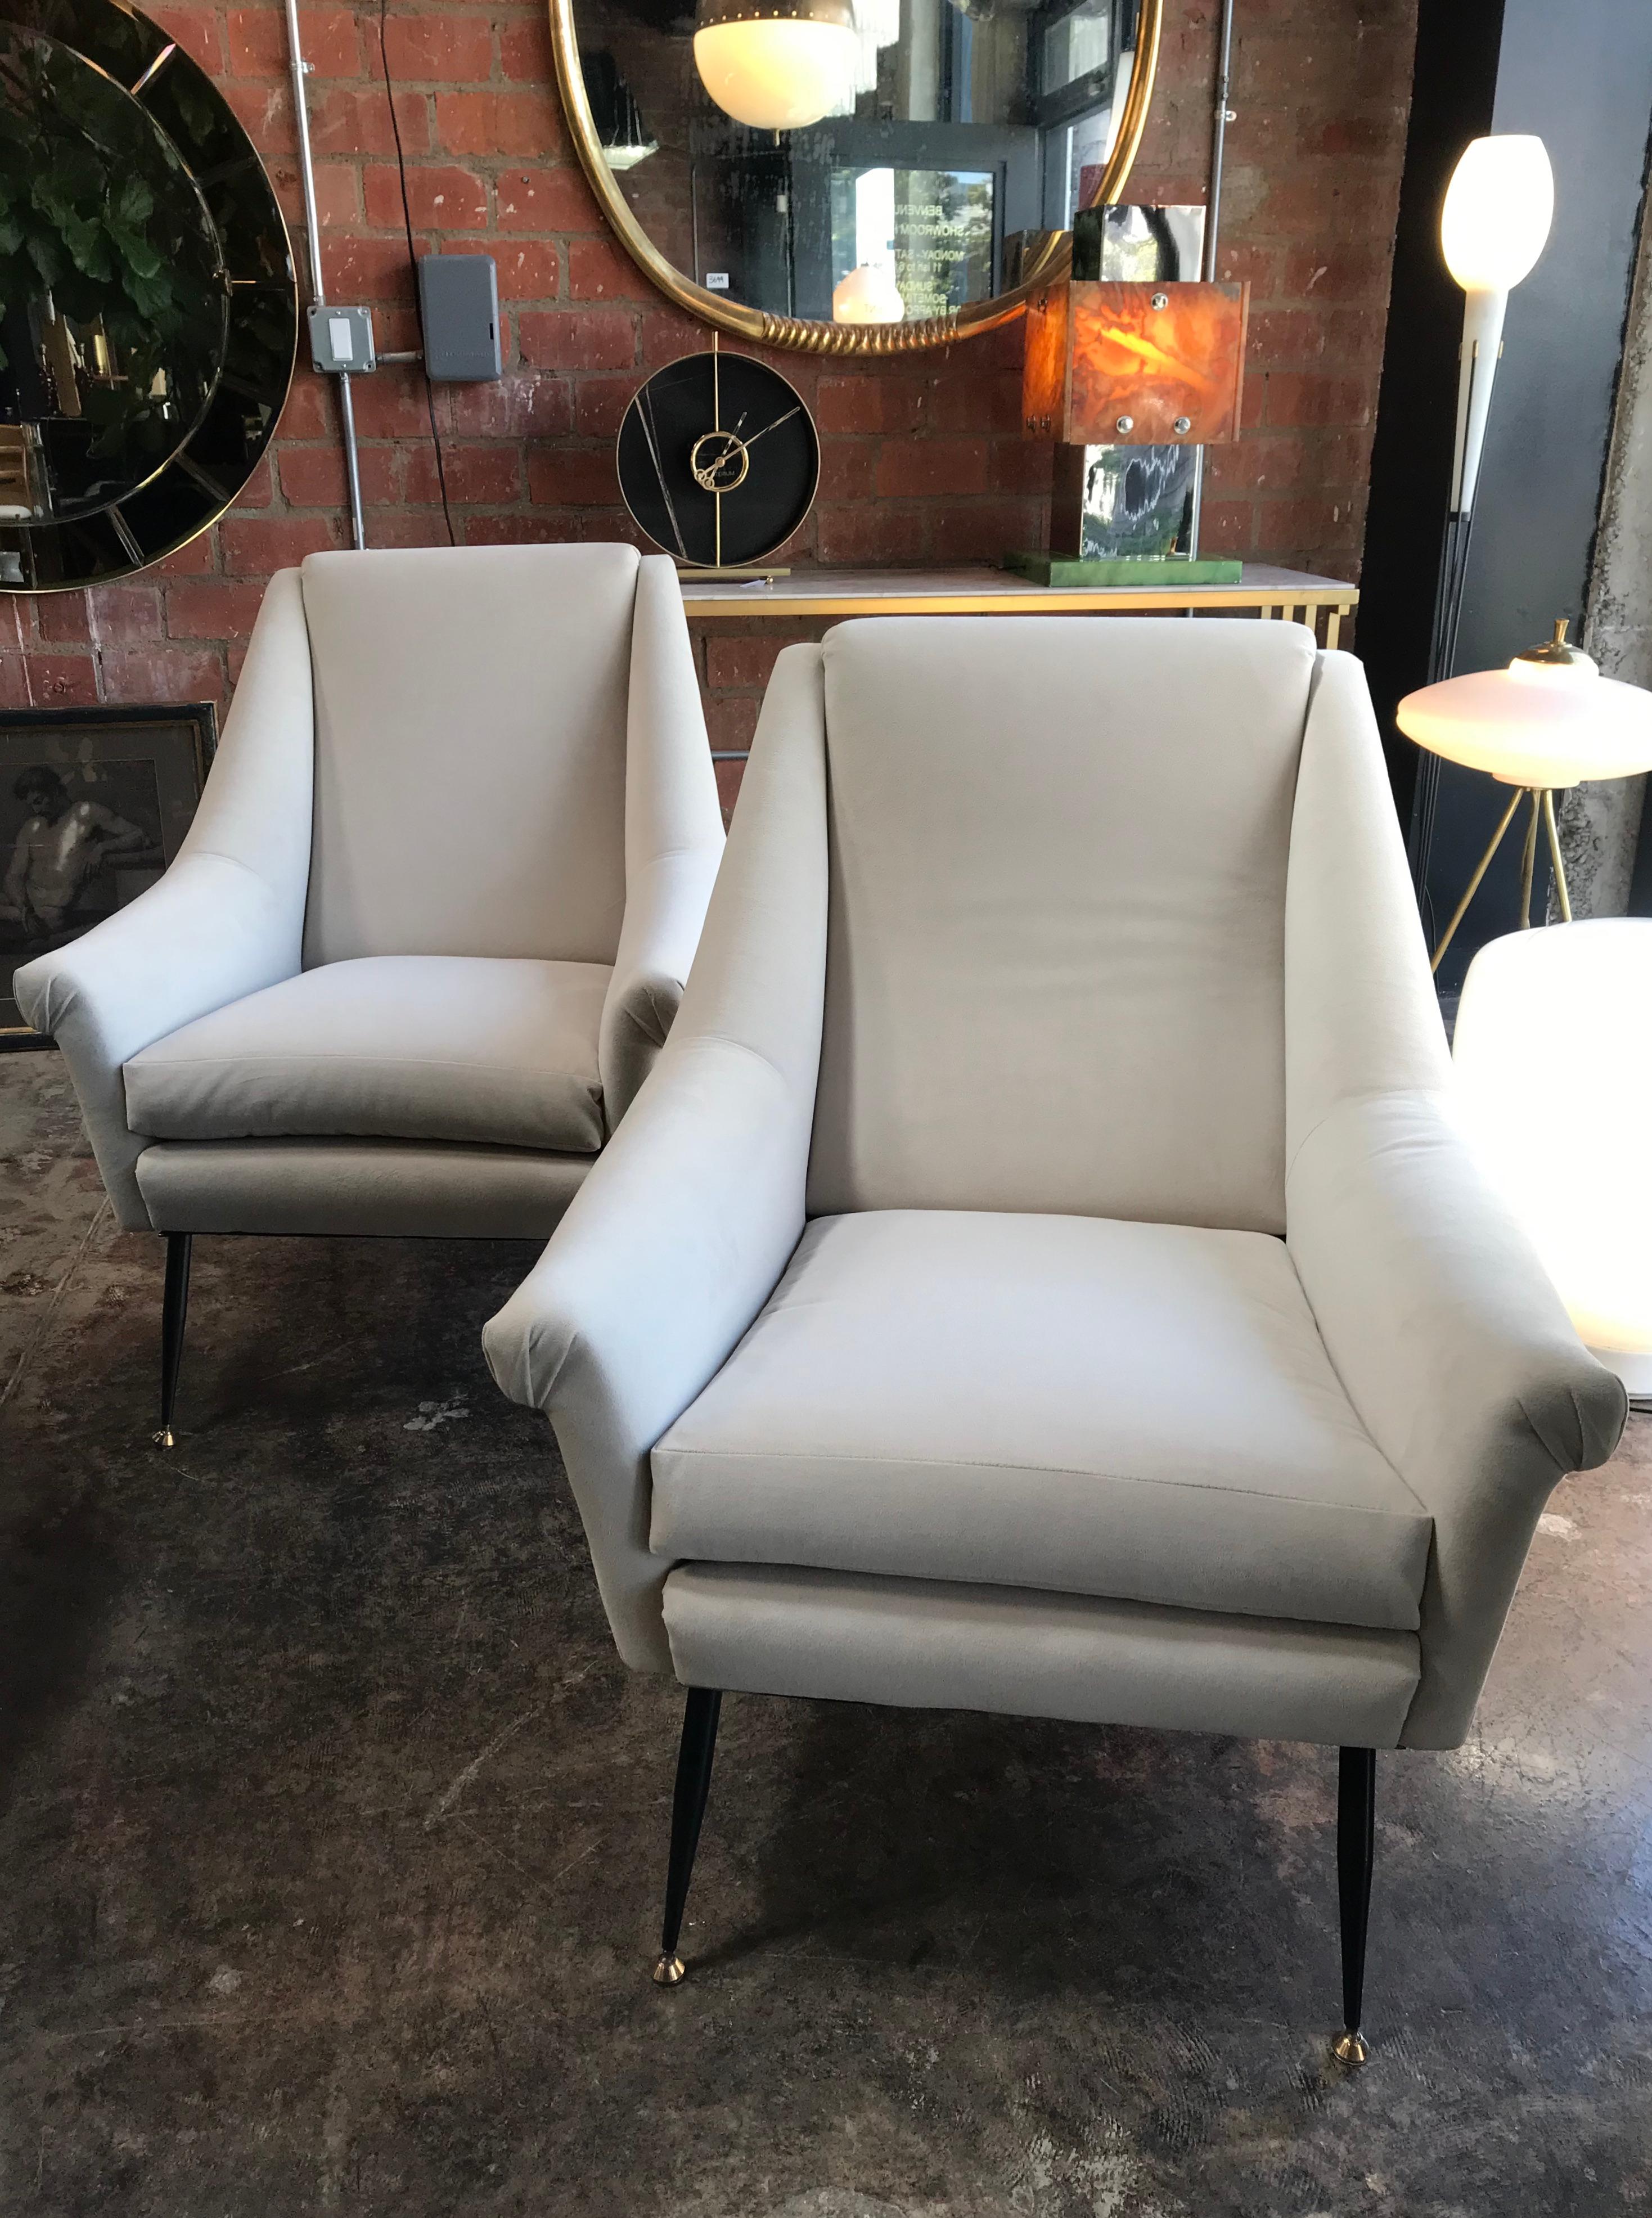 A pair of very stylish and extremely comfortable Italian midcentury armchairs or by Anonima Castelli, original from the 1960s with polished brass details on the legs. The seats are upholstered.